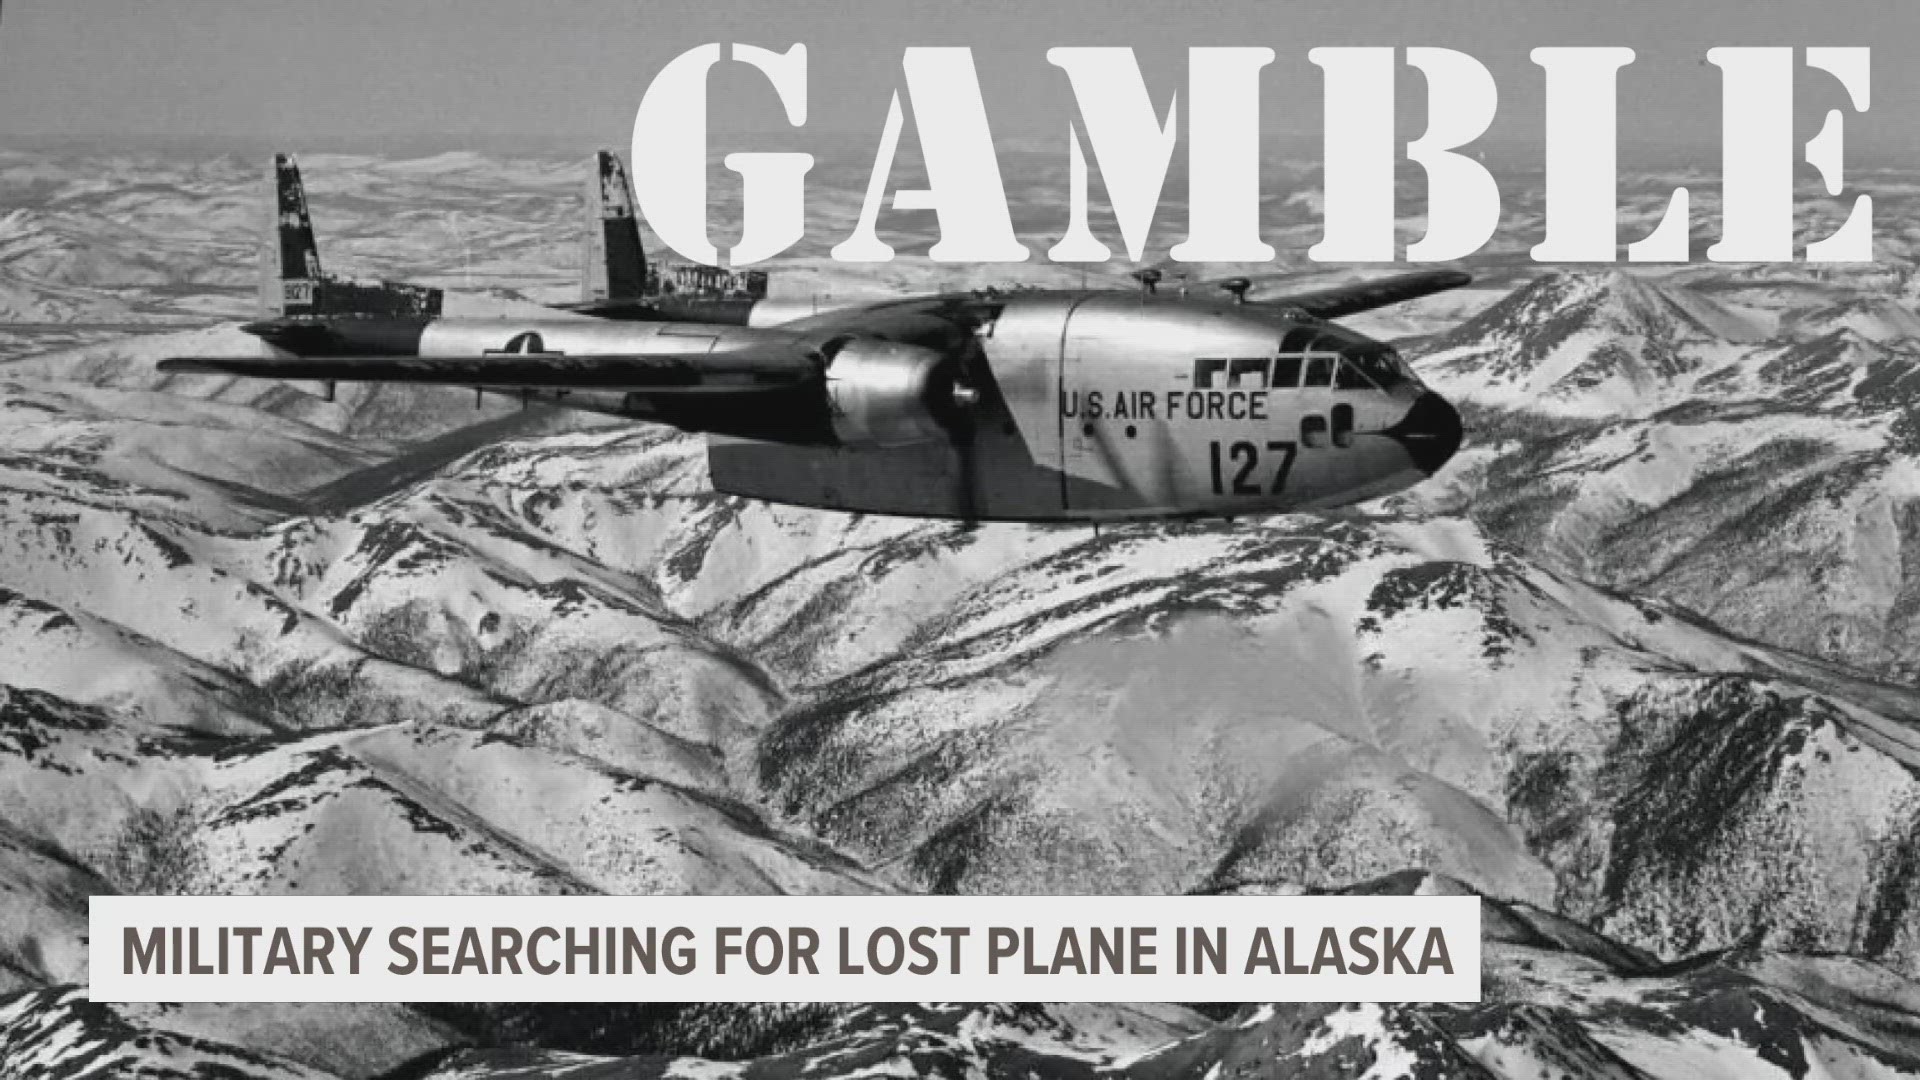 "Bring him home," said Gail Daugherty's sister, Claudette. Gail and 18 others died in an Alaskan plane crash in 1952. Now, the military searches for what remains.